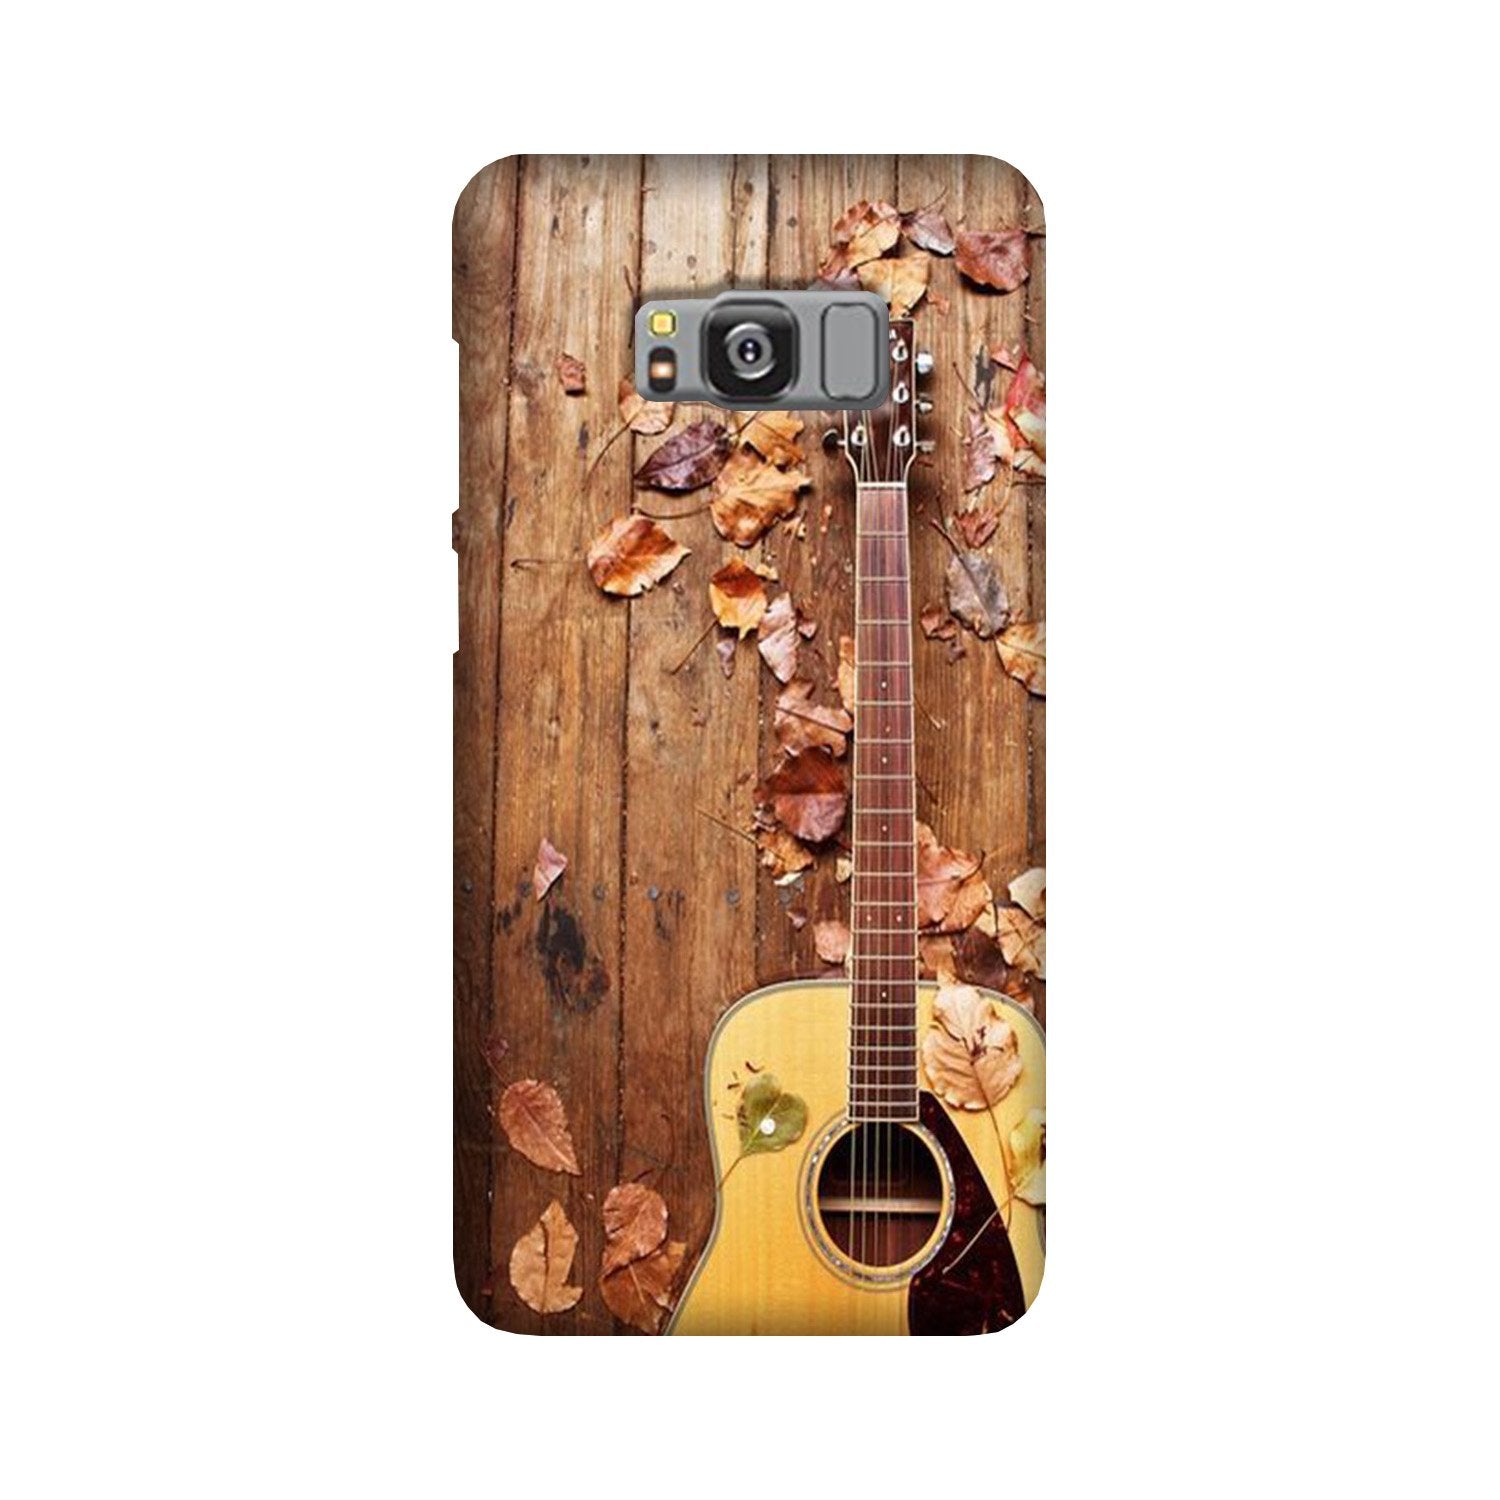 Guitar Case for Galaxy S8